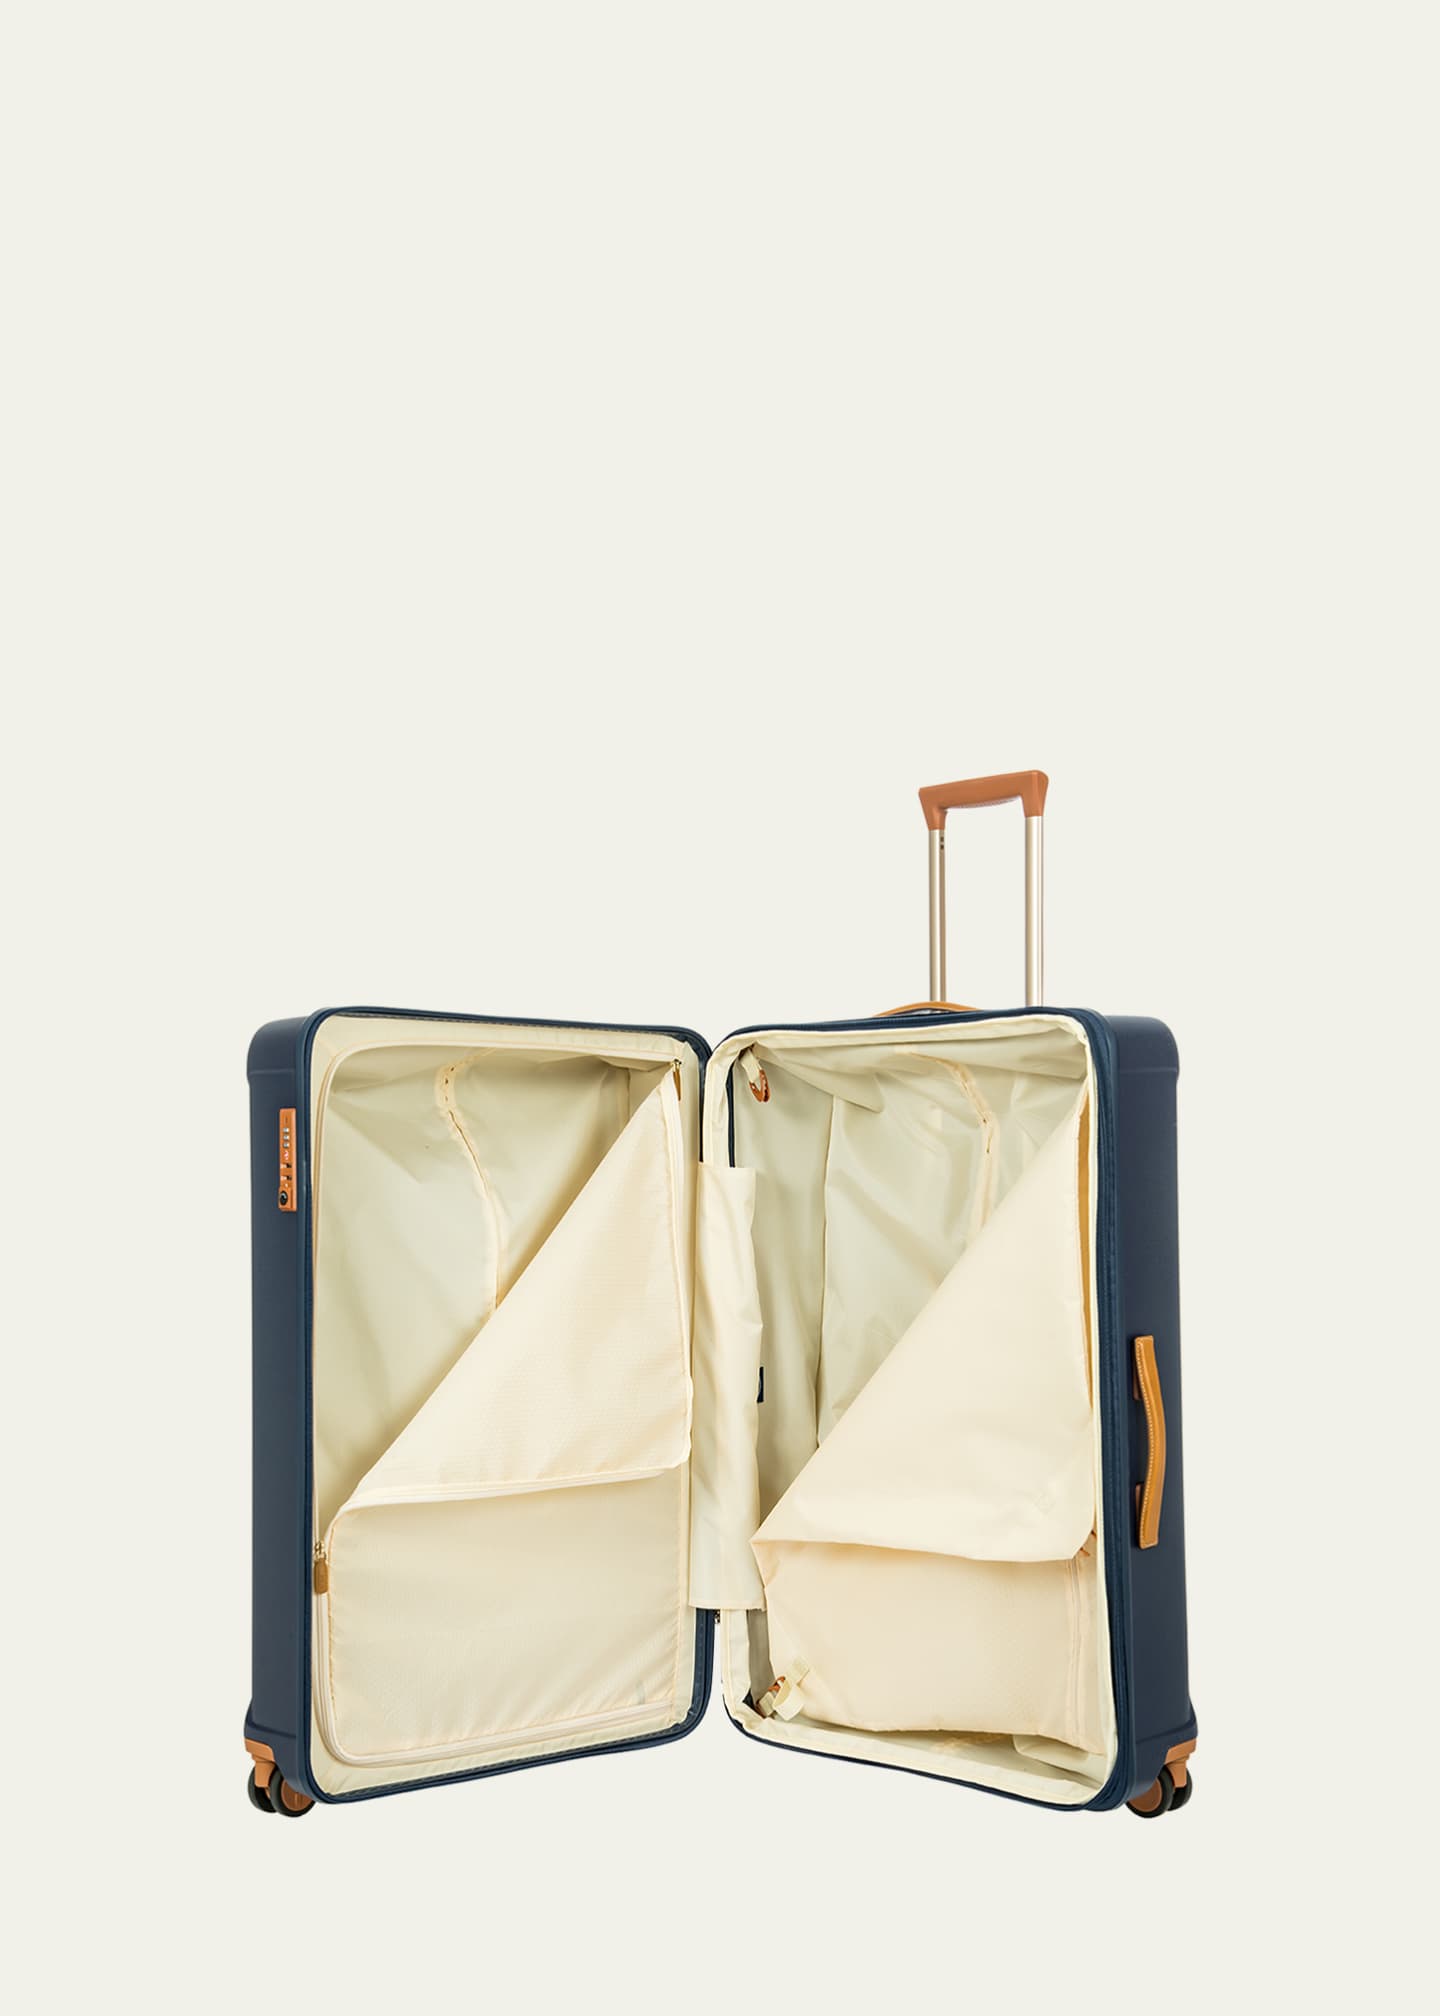 Bric's Capri 2.0 32" Spinner Expandable Luggage Image 3 of 4